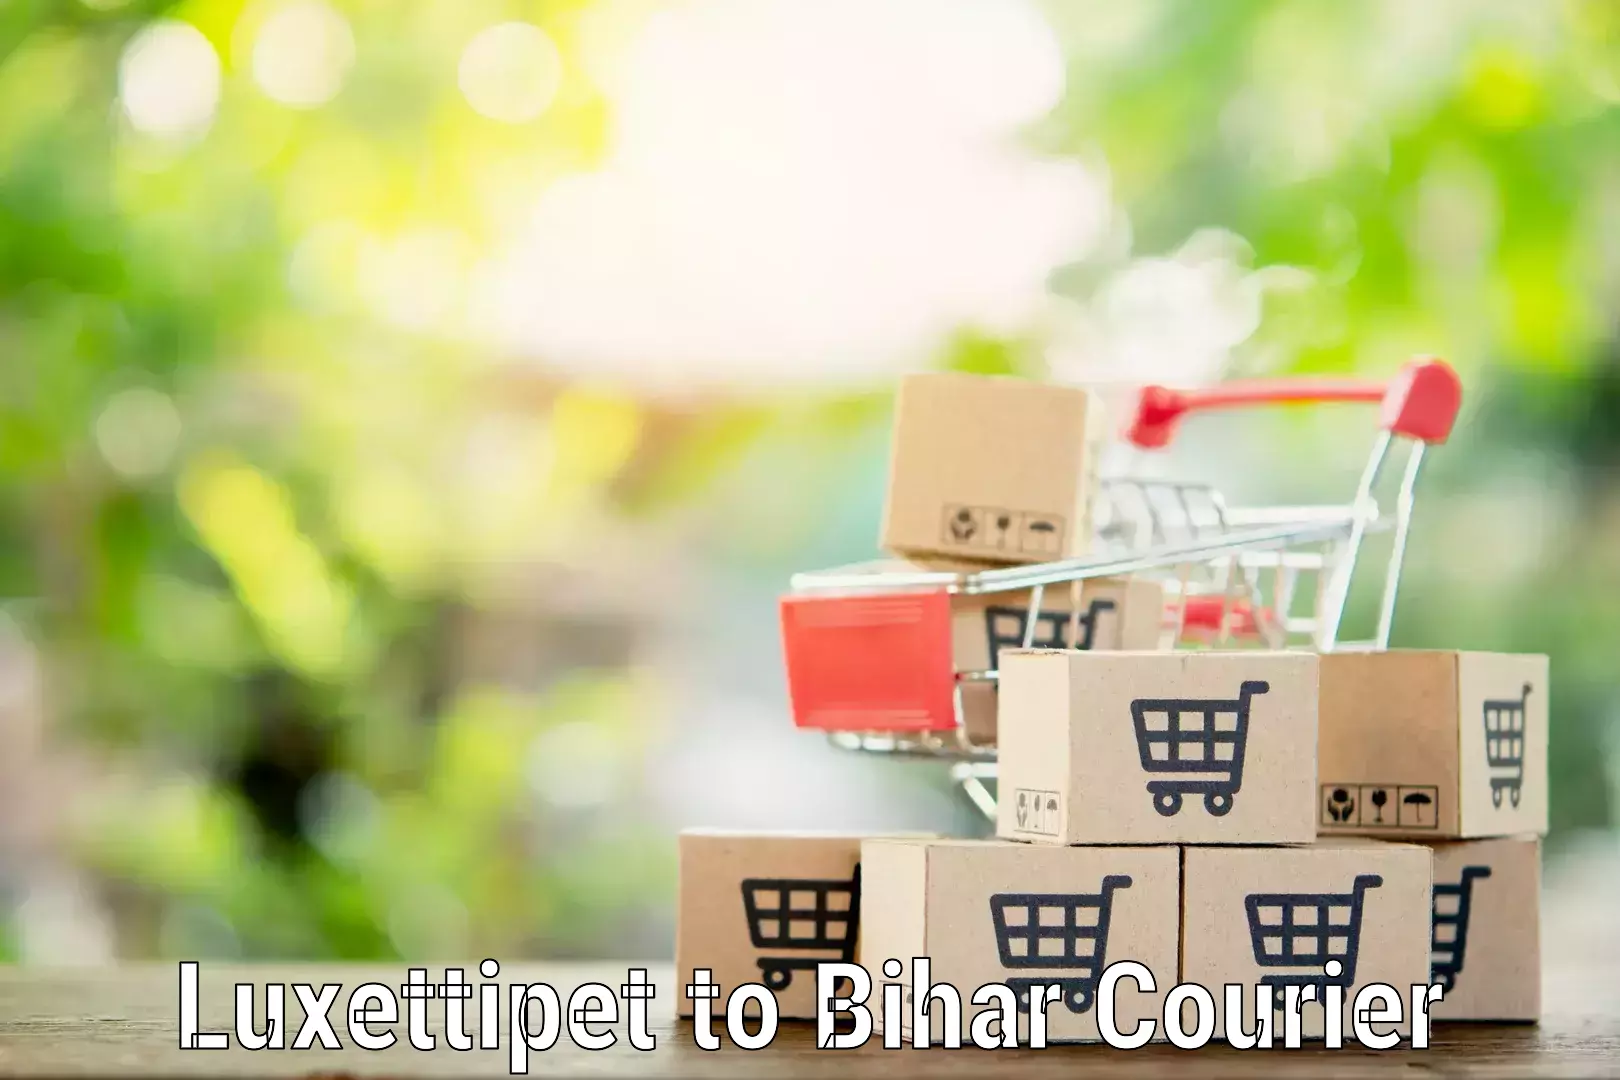 Household goods transport service Luxettipet to Dhaka